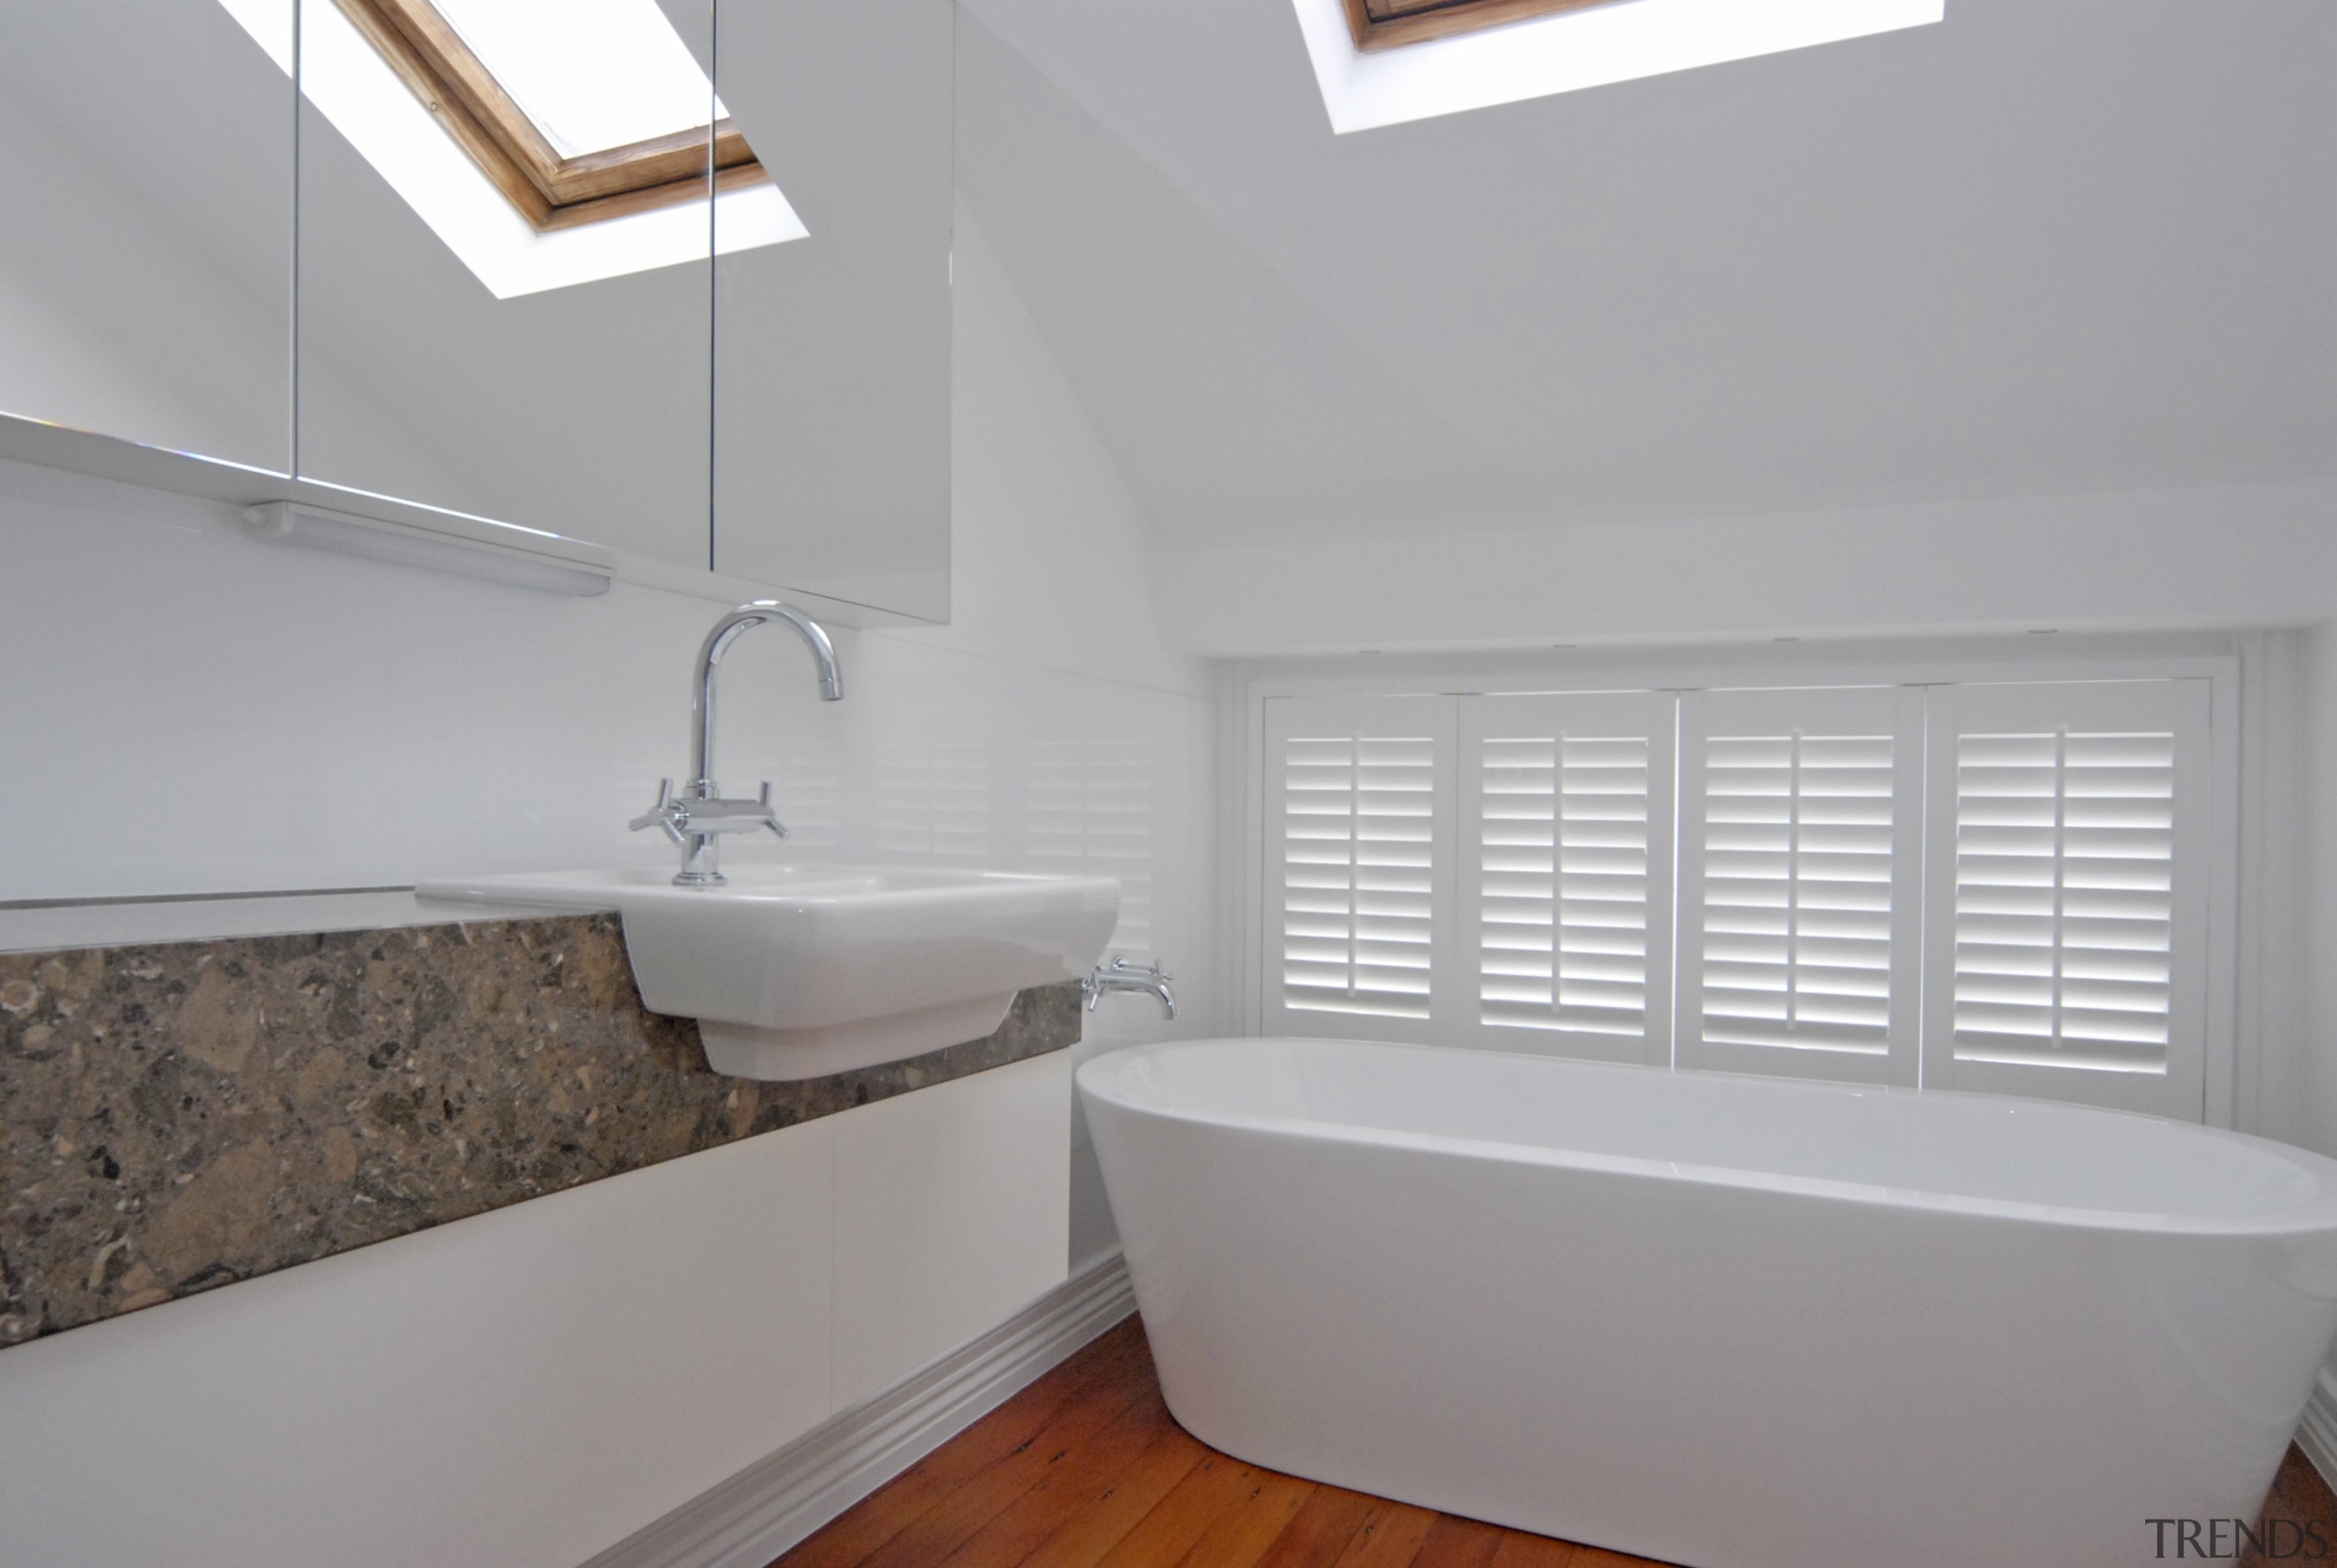 Parnell 4 - architecture | bathroom | daylighting architecture, bathroom, daylighting, floor, home, house, interior design, property, real estate, room, sink, tap, window, gray